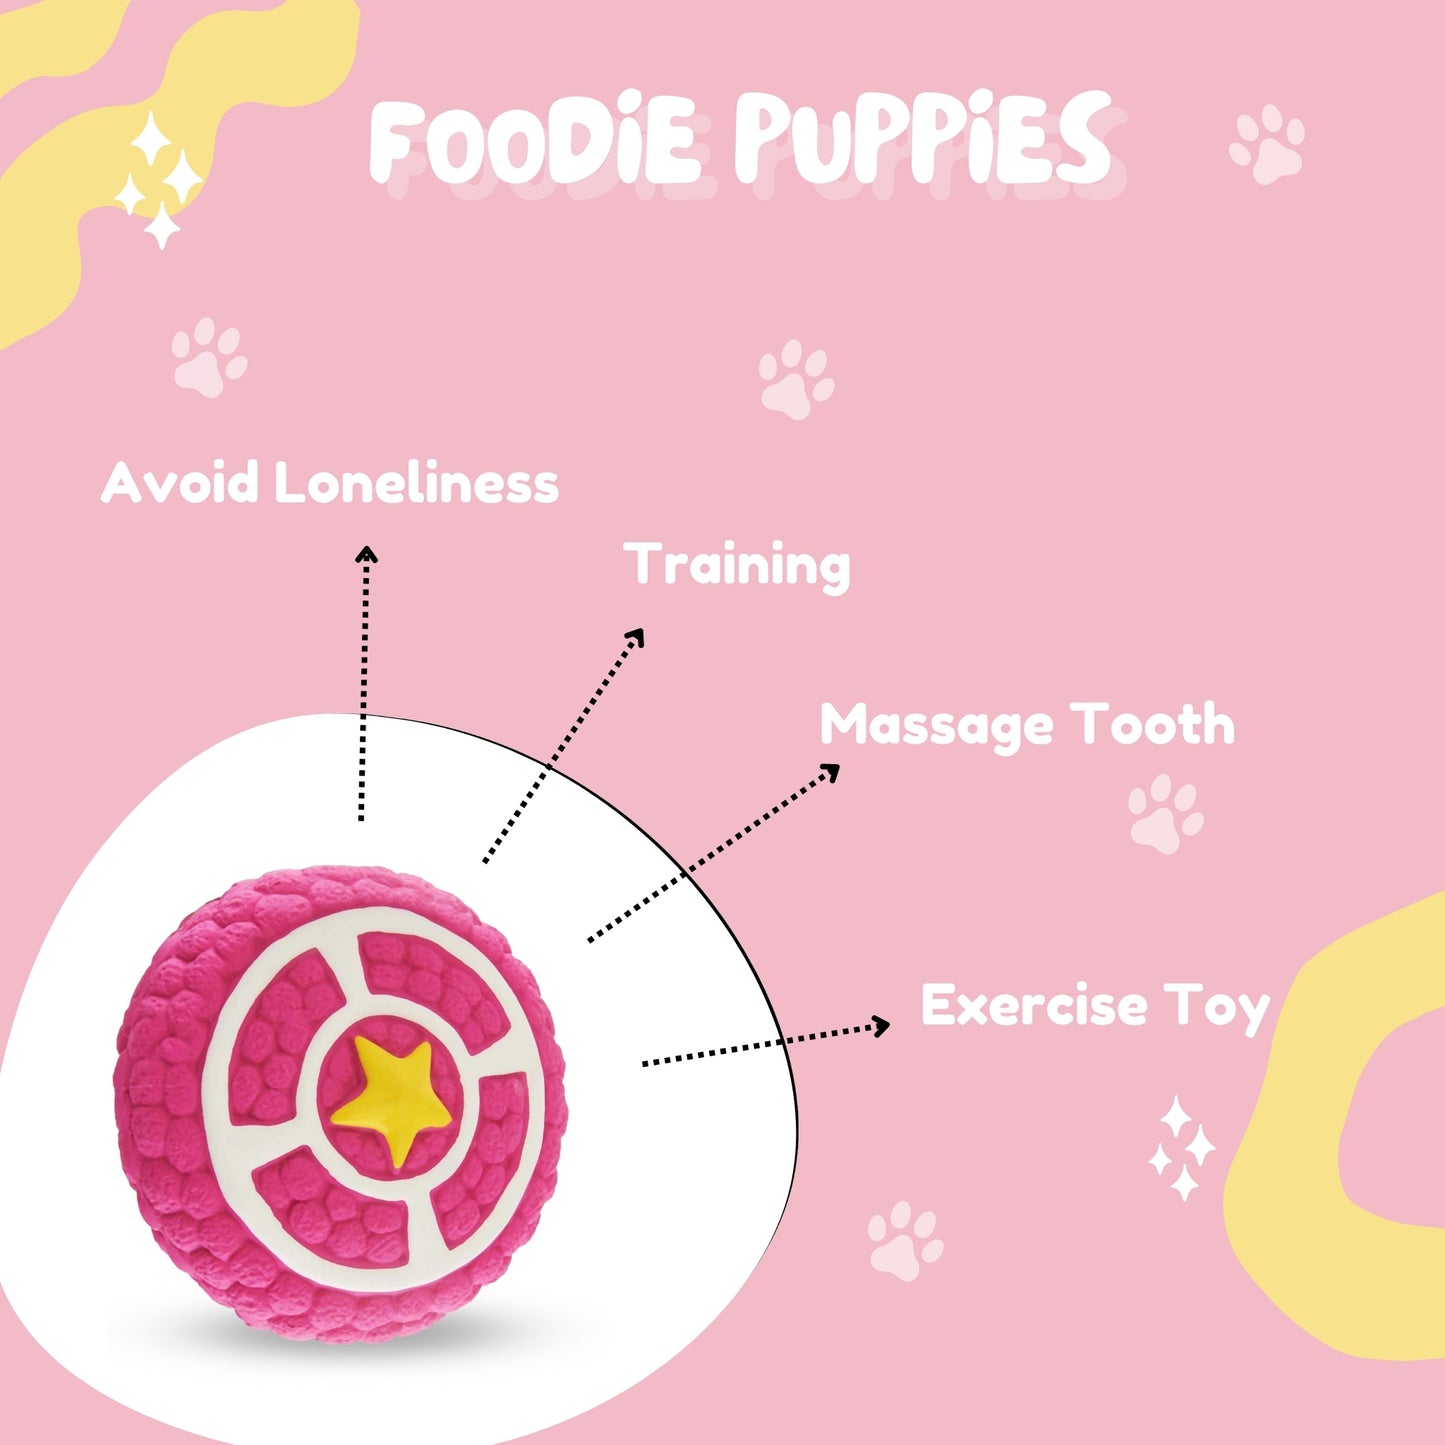 Foodie Puppies Latex Squeaky Toy for Dogs & Puppies - Pink Pie, Small